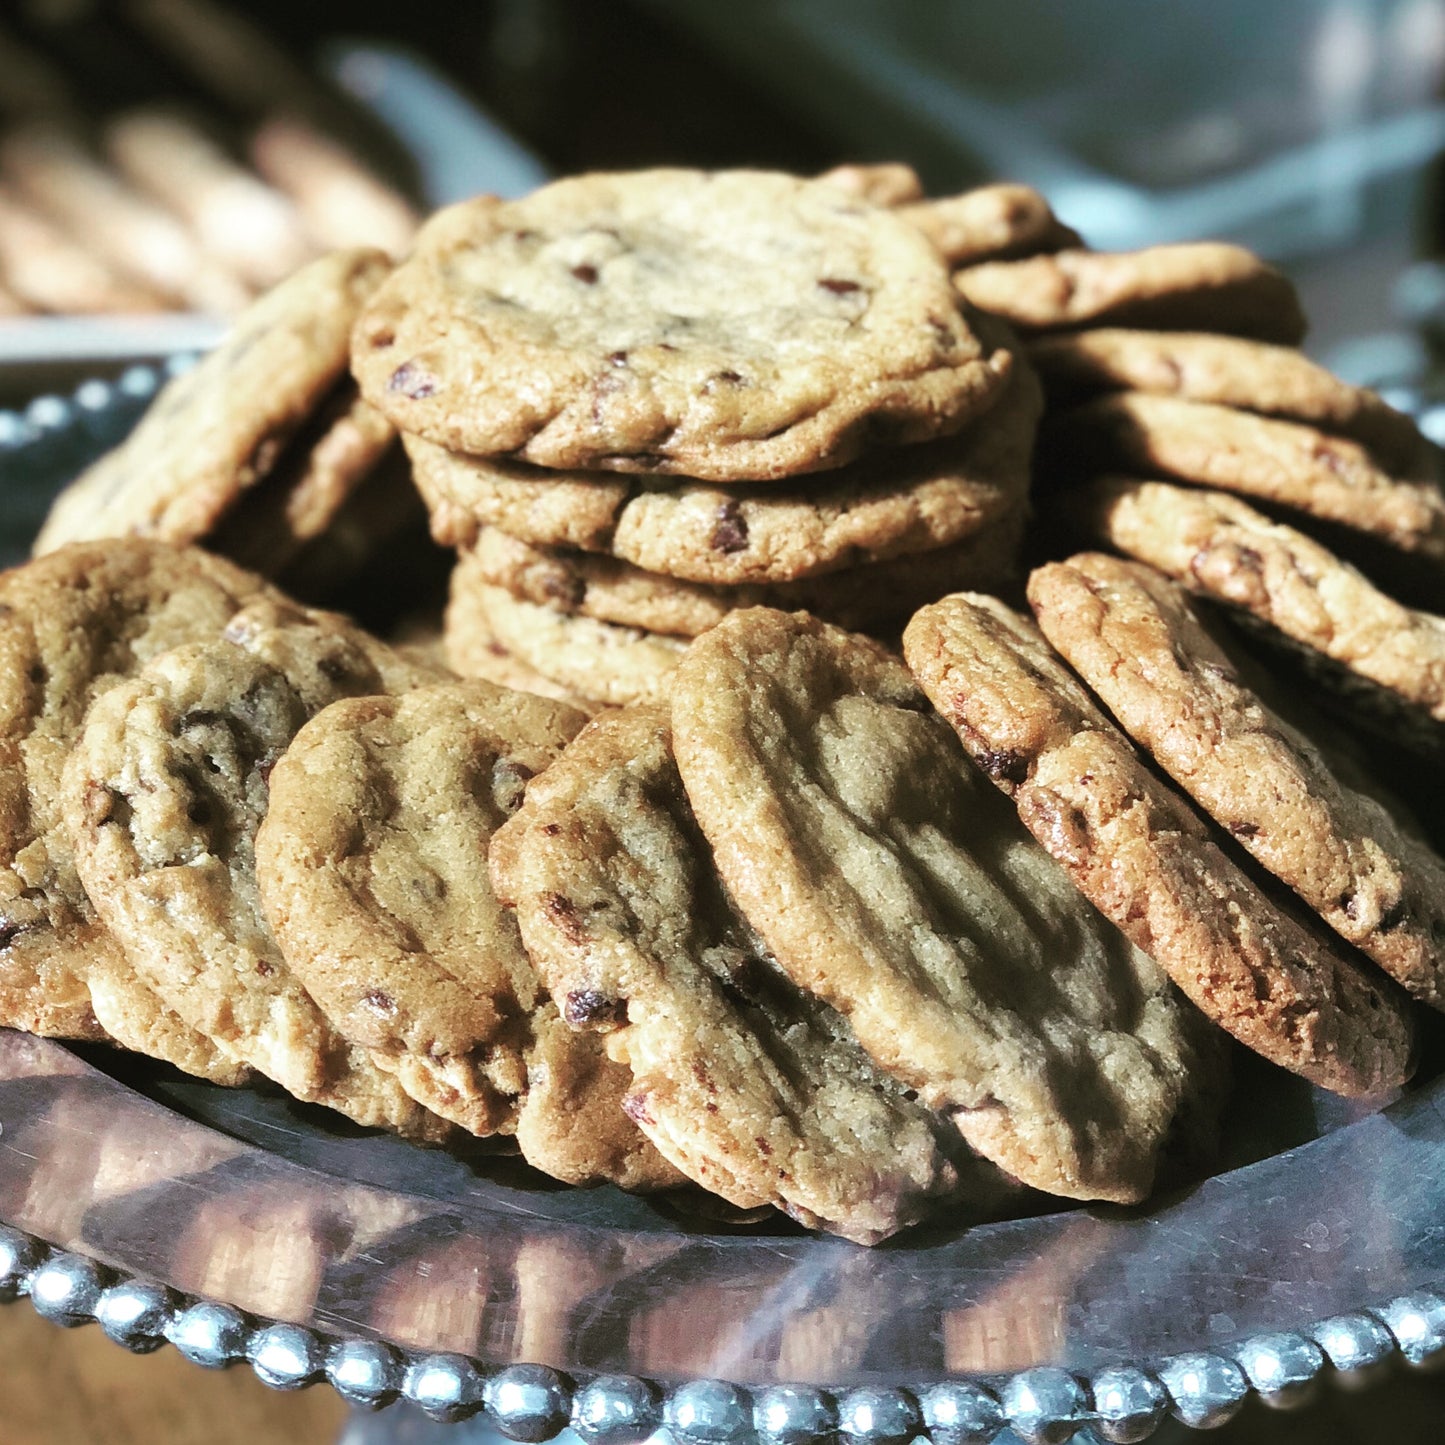 Warm Chocolate Chip Cookies (4 Total)